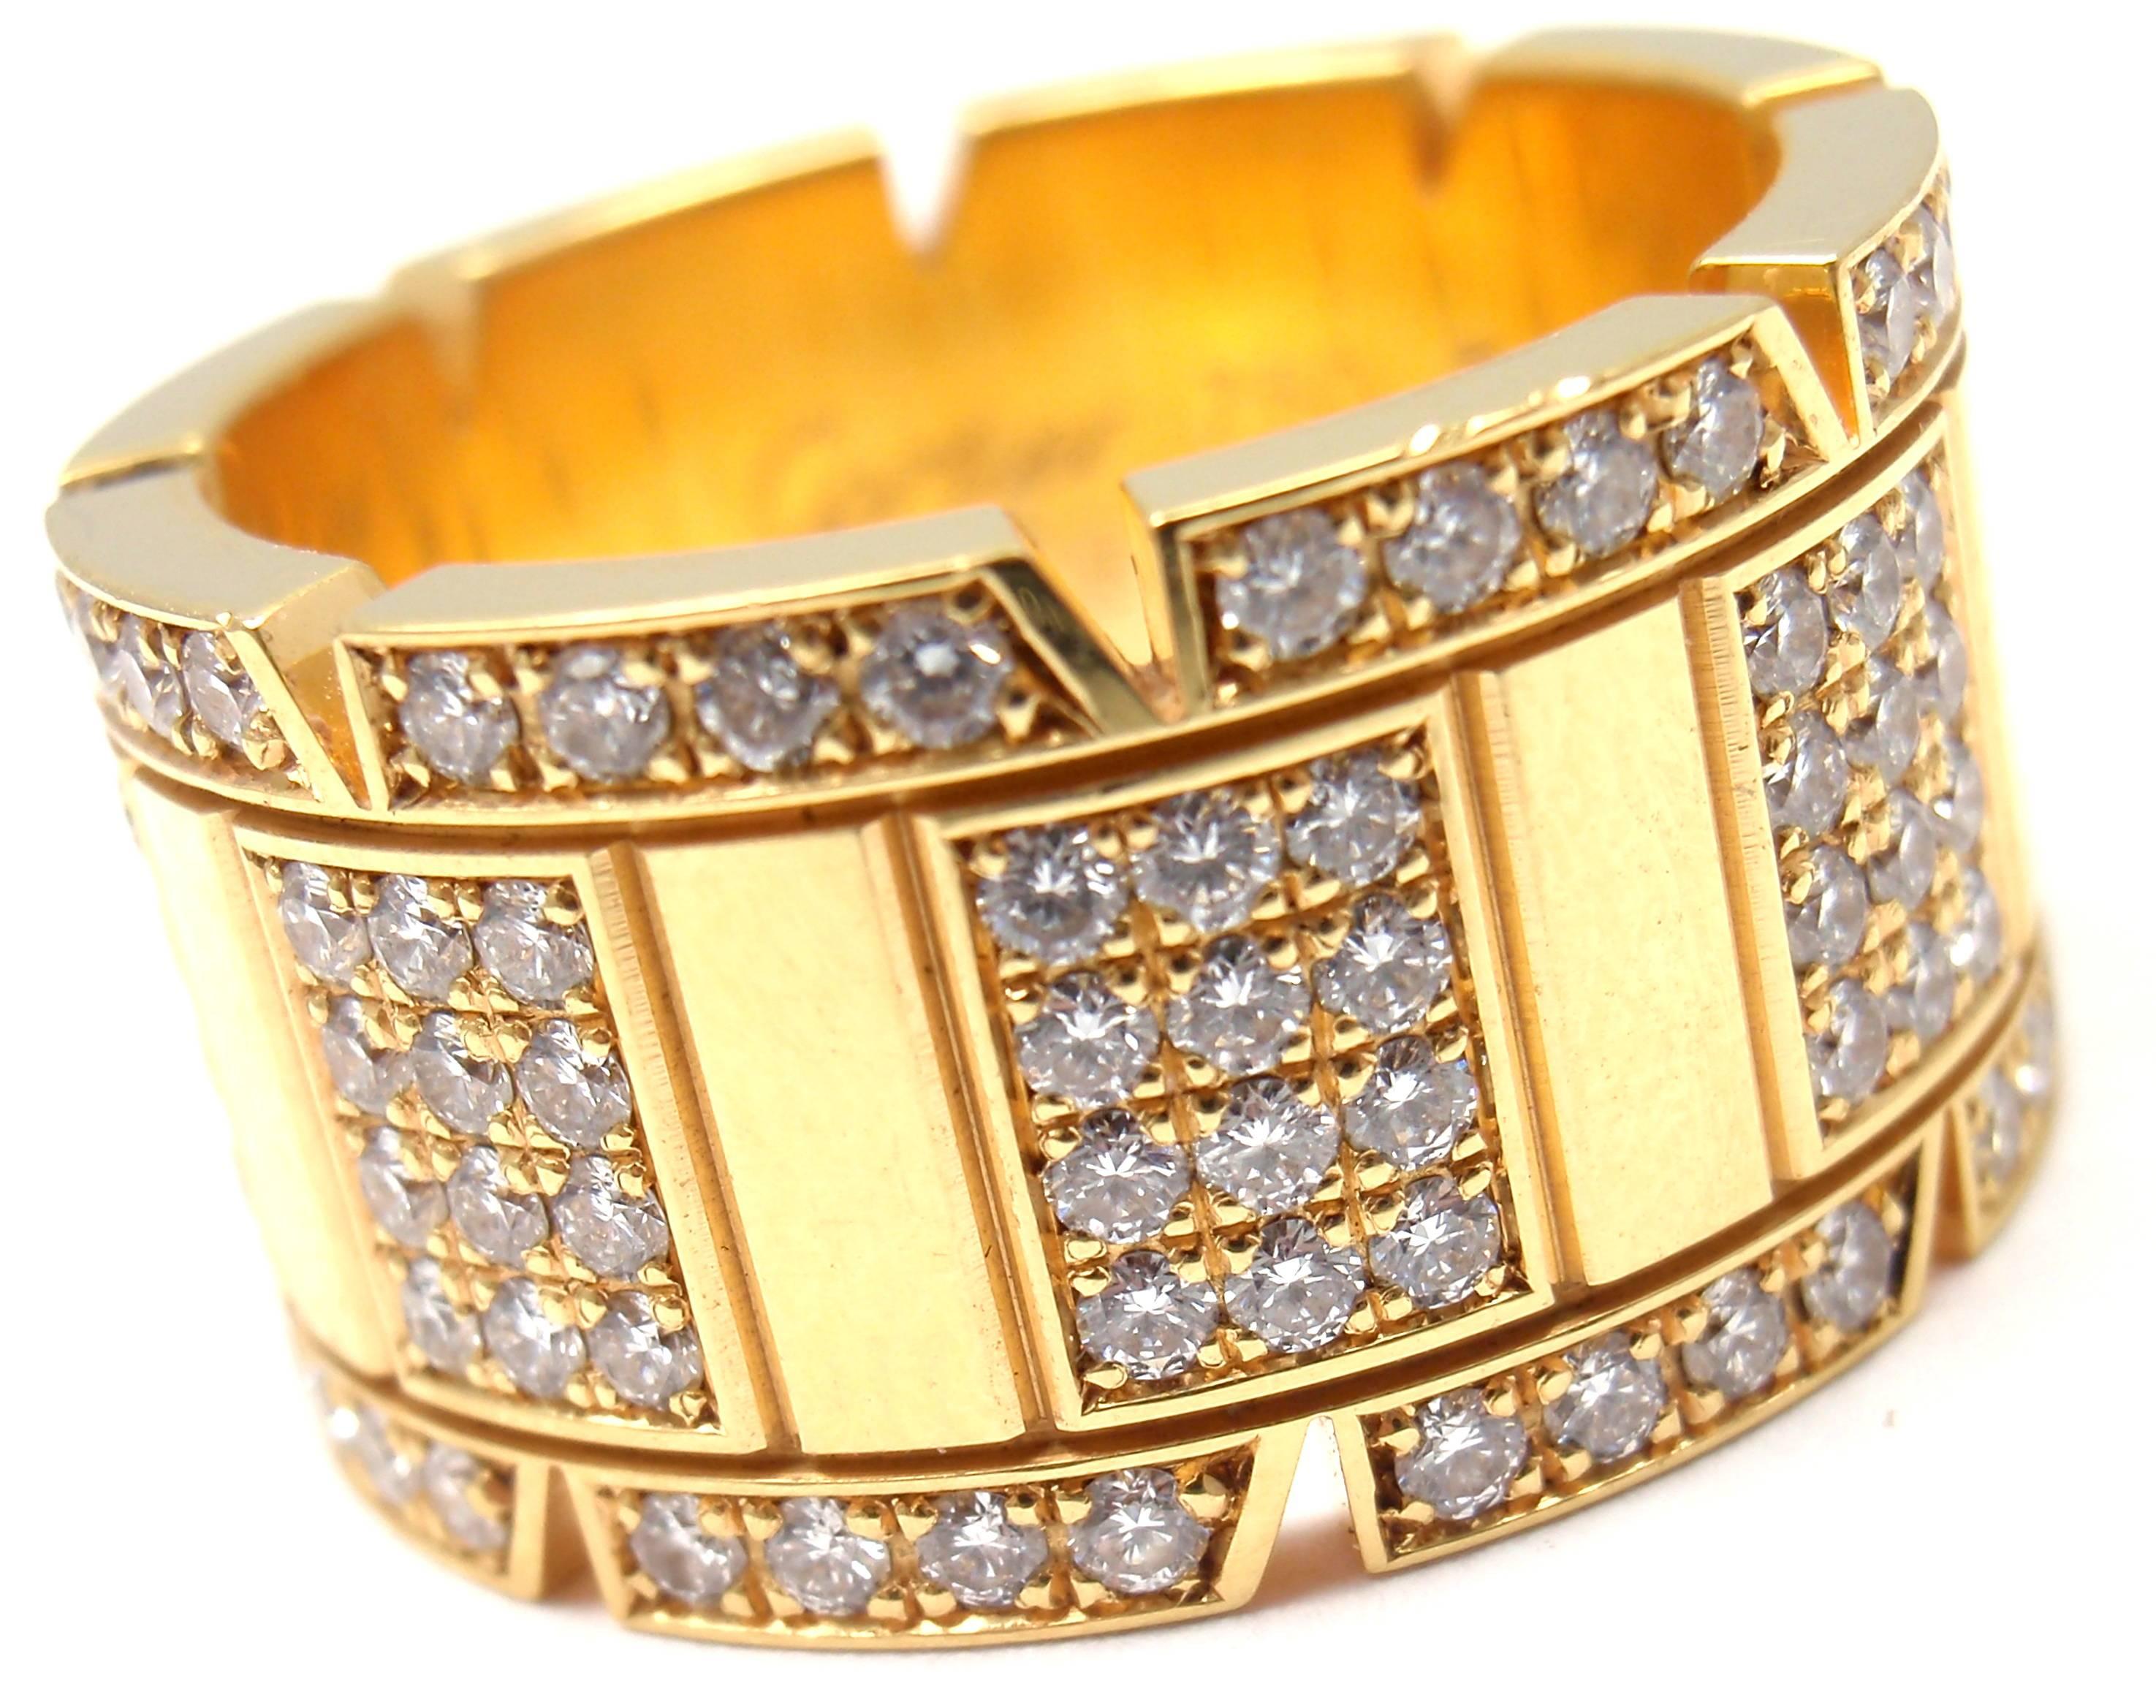 Cartier Large Model Tank Francaise Diamond Gold Band Ring 2